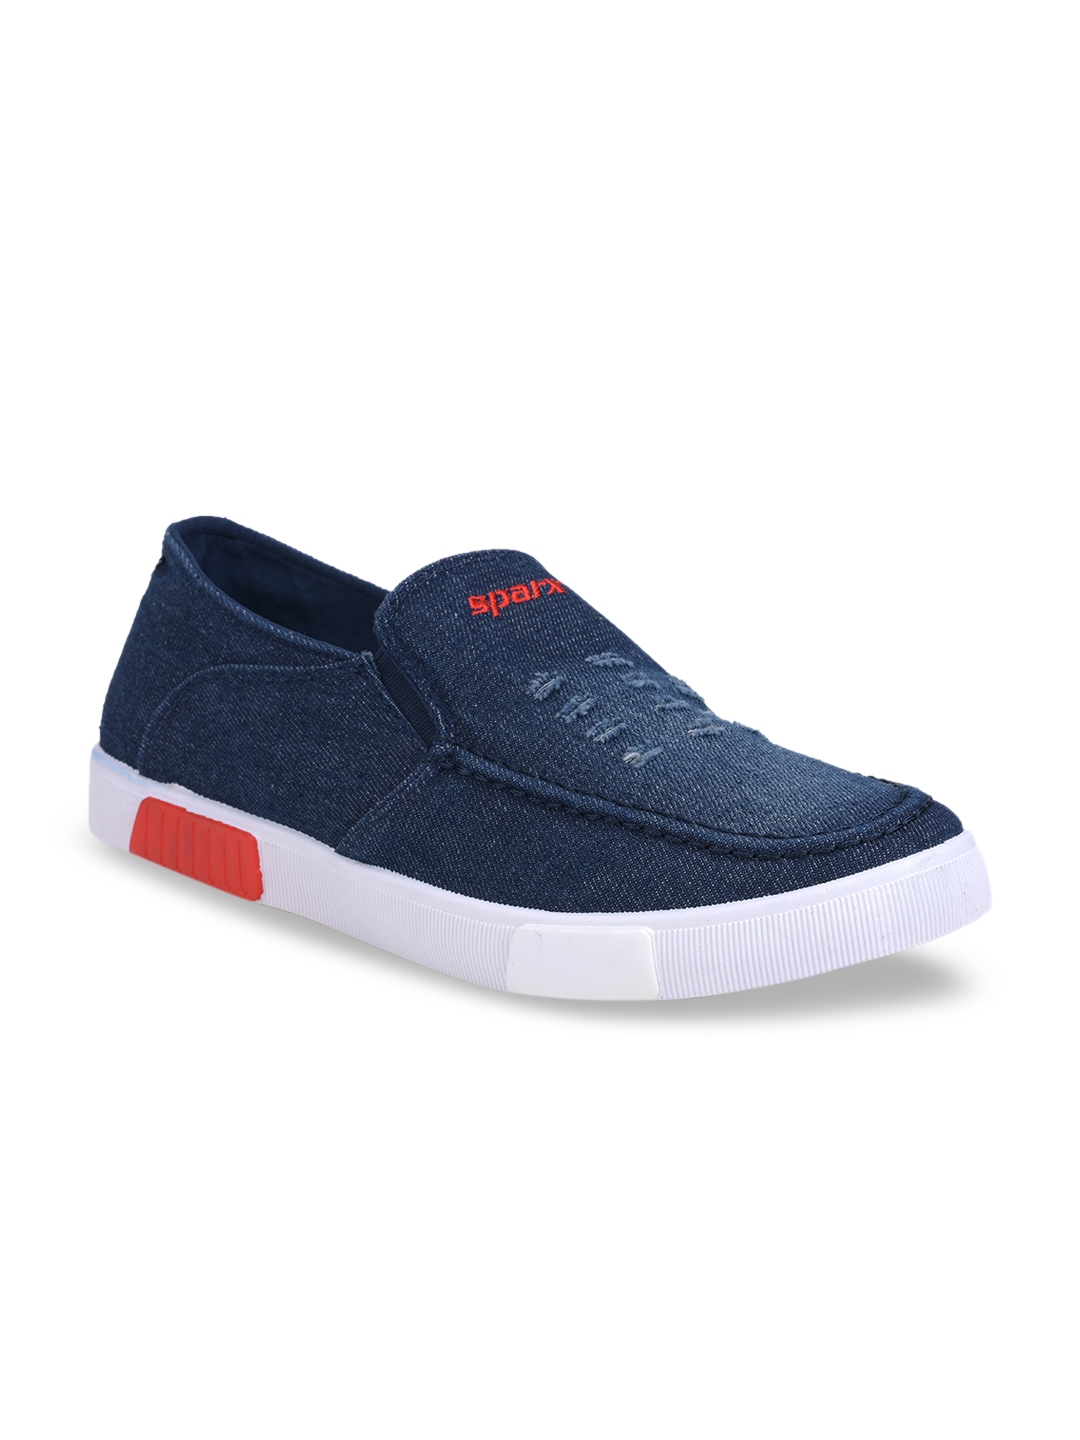 Buy Sparx Men Navy Blue Solid Slip On Sneakers - Casual Shoes for Men ...